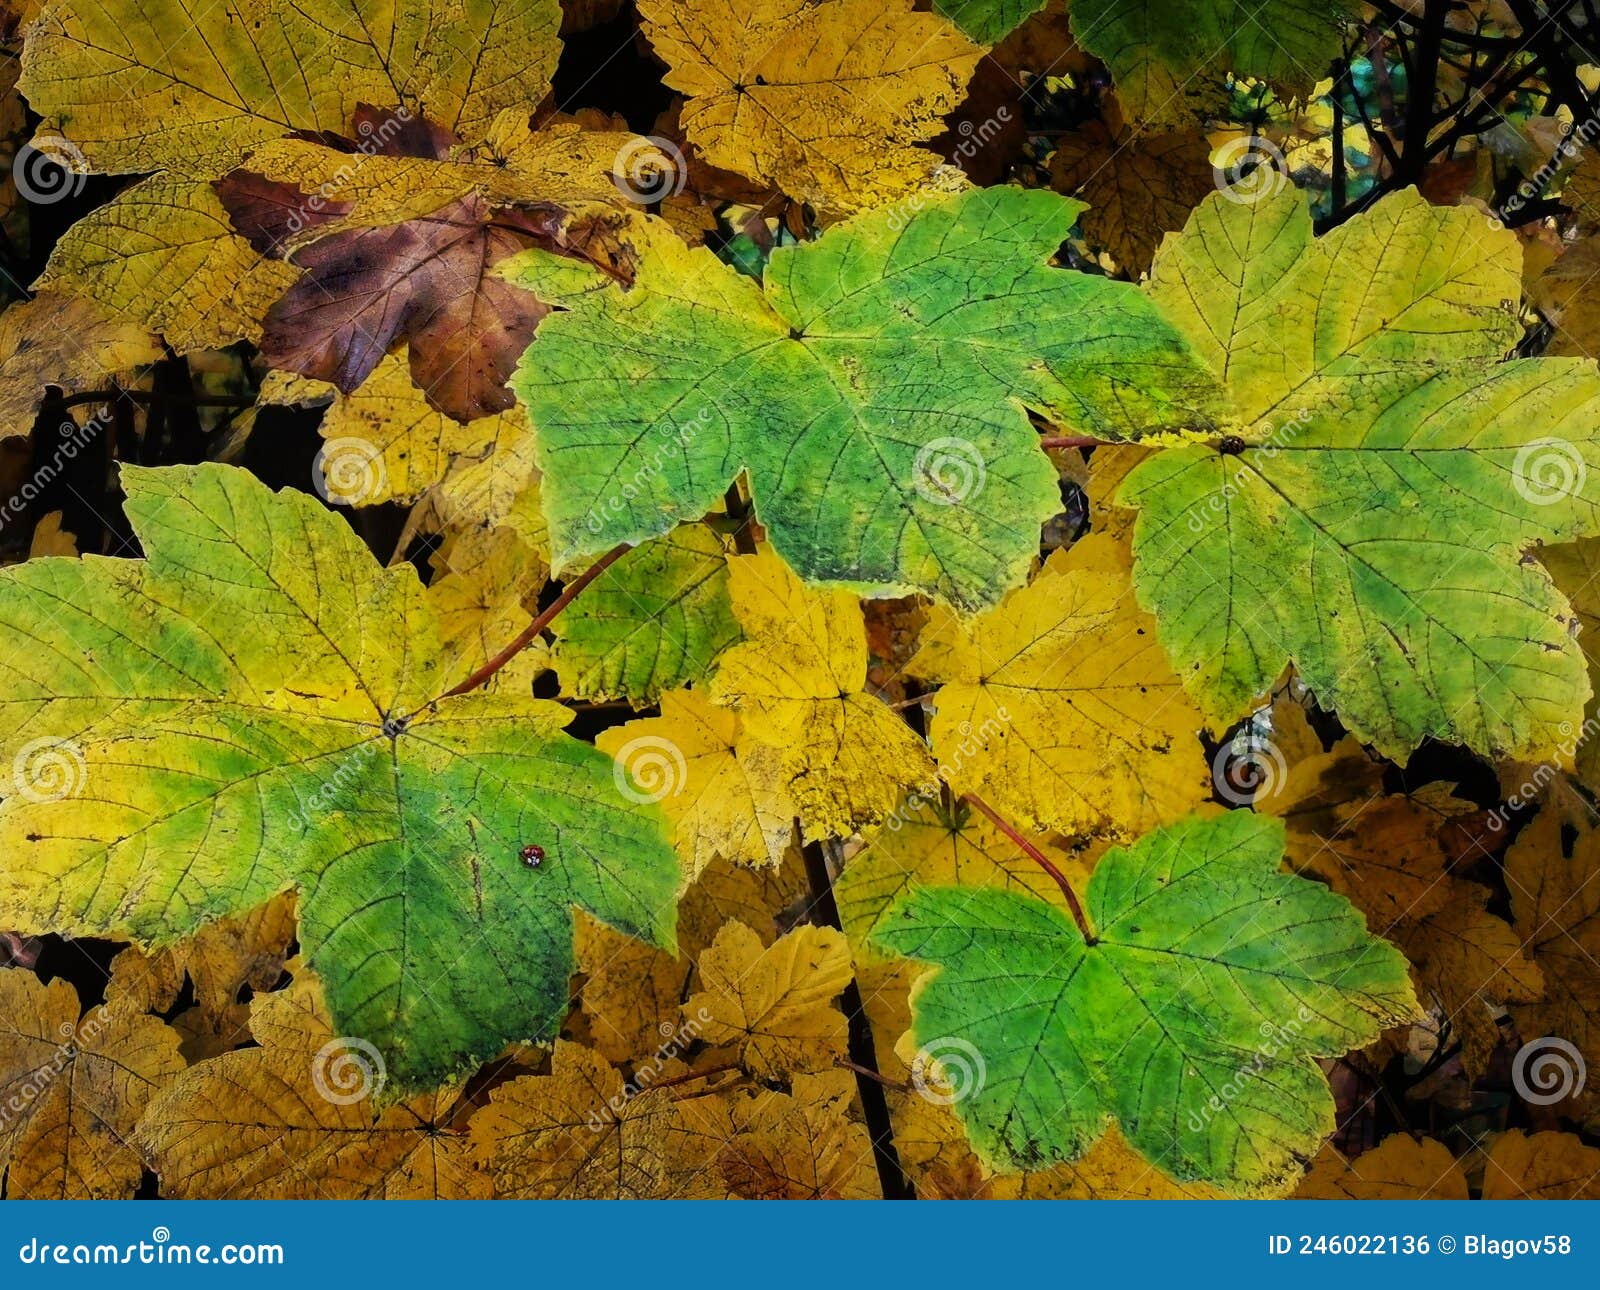 an abstract background image of a yellowish green autumn leaves